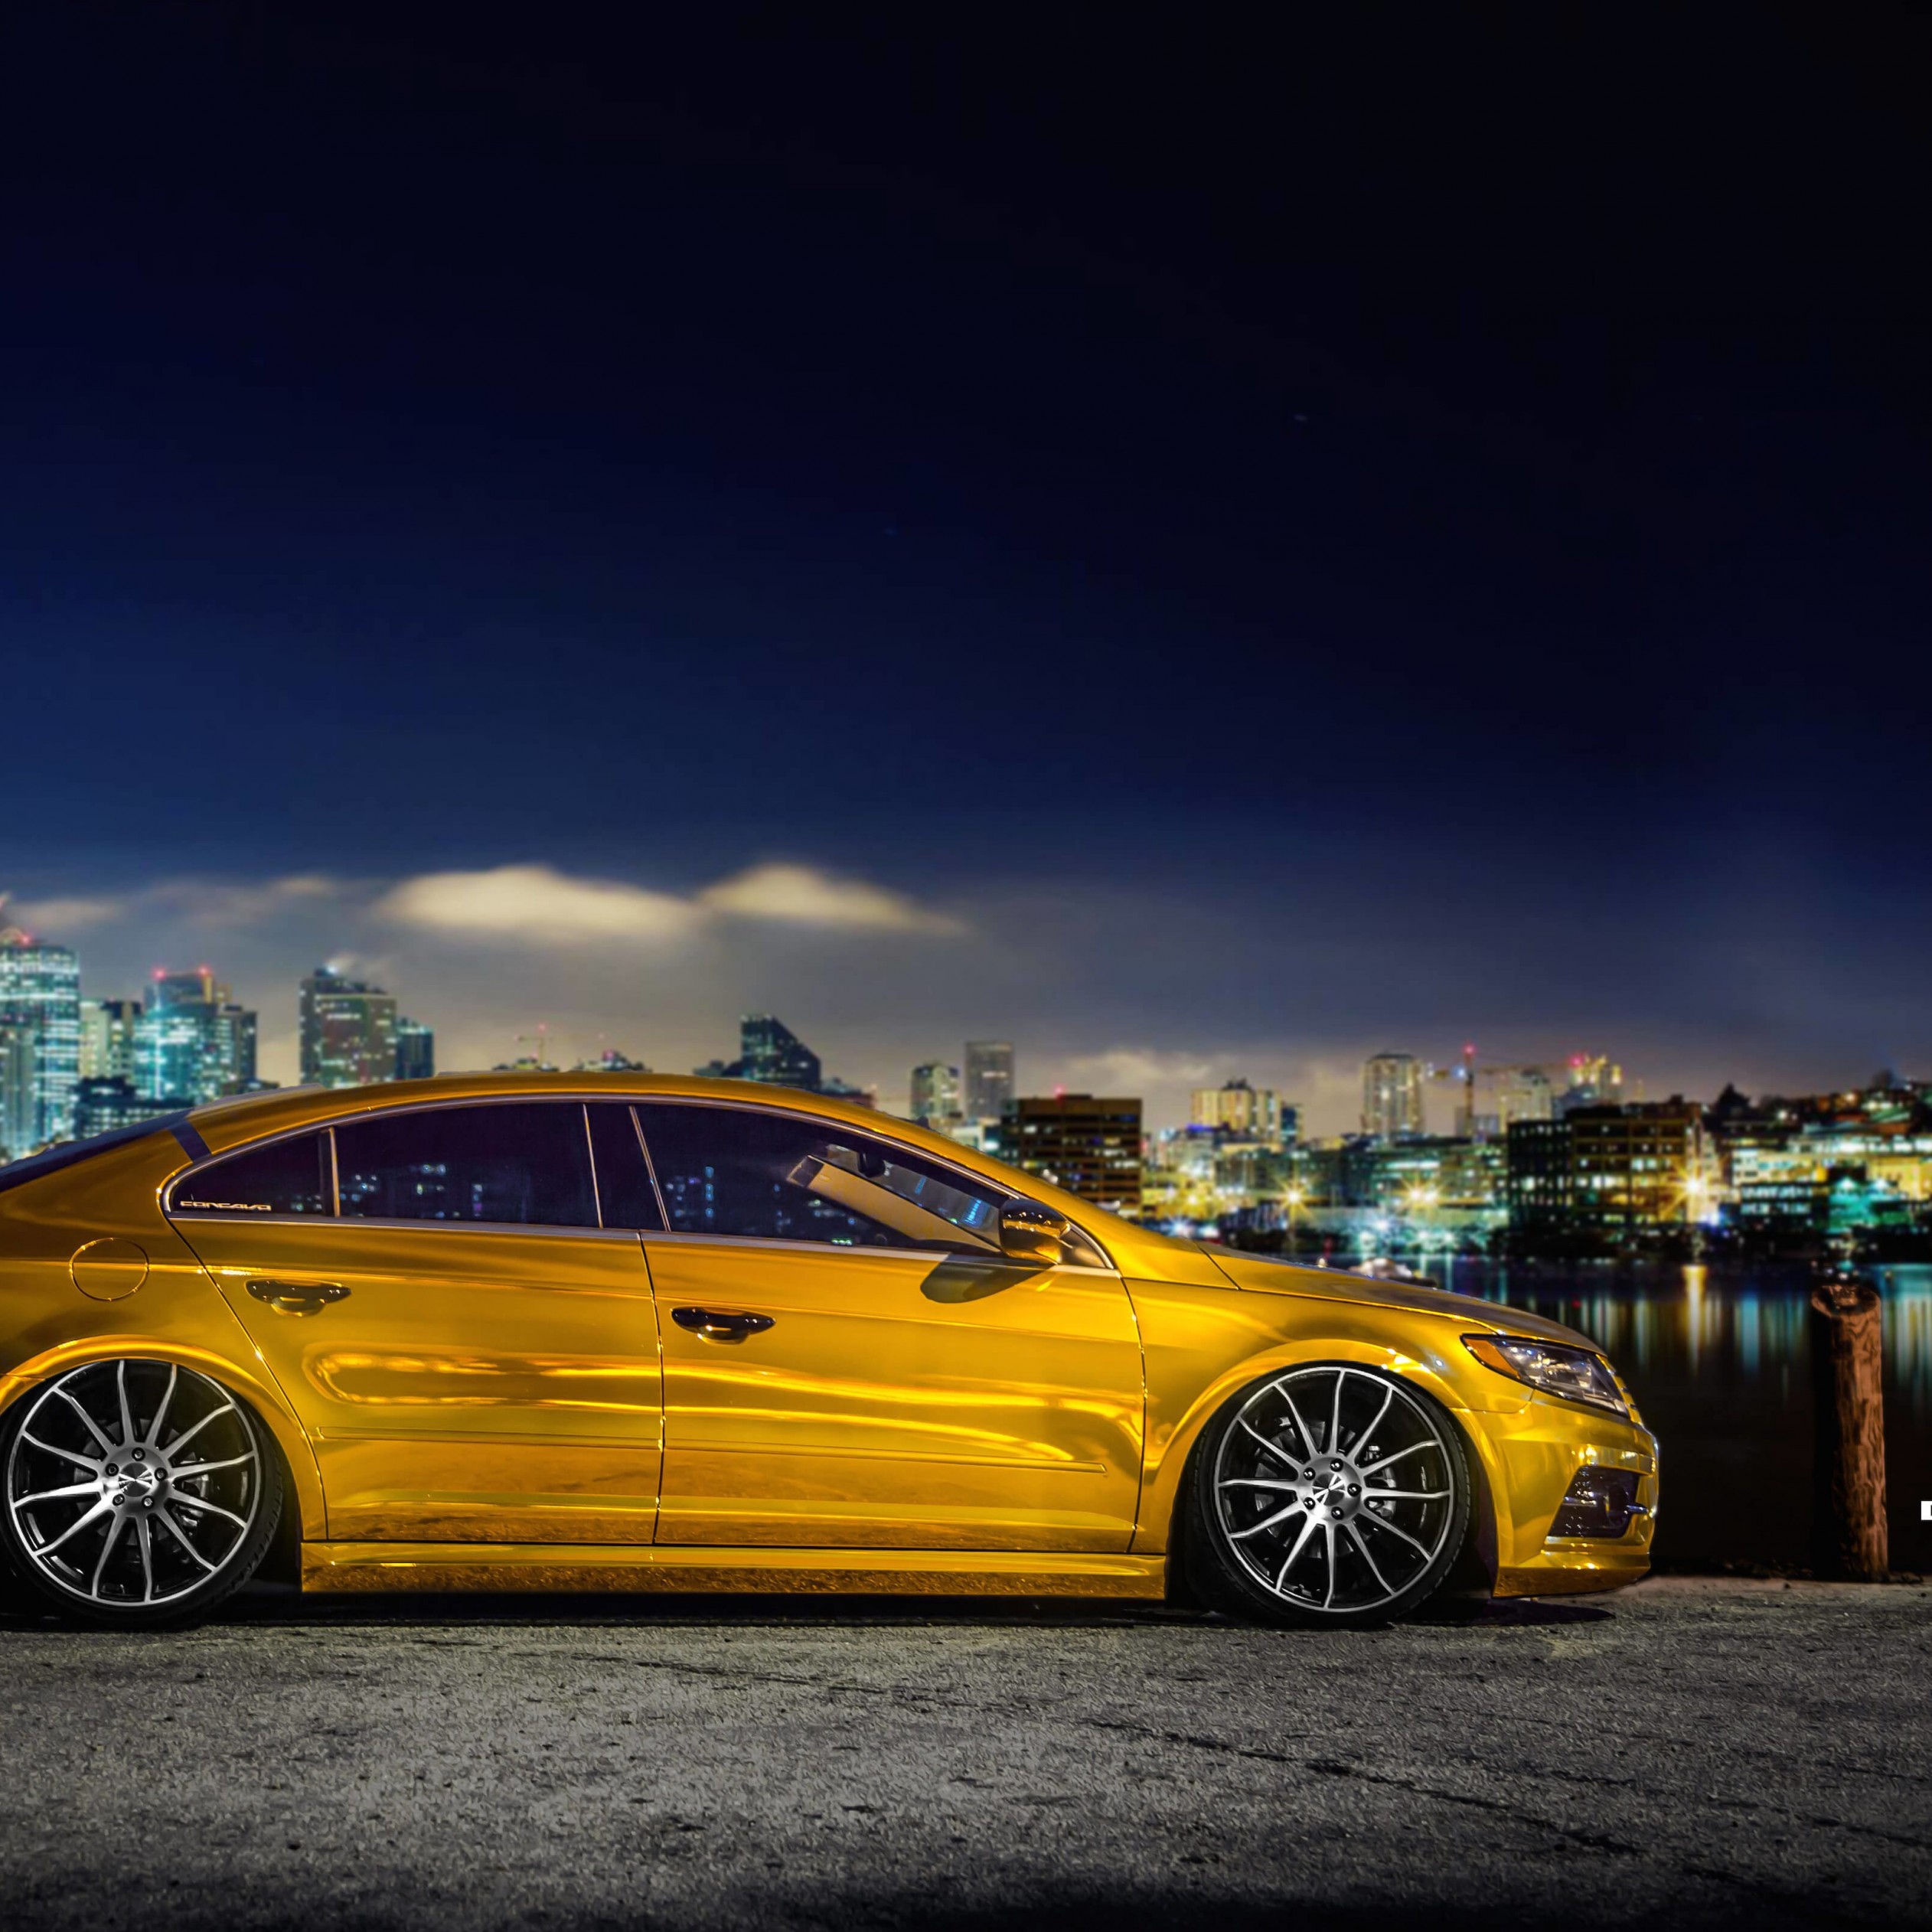 Volkswagen CC on CW-12 Concave Wheels Wallpaper for Apple iPad Air